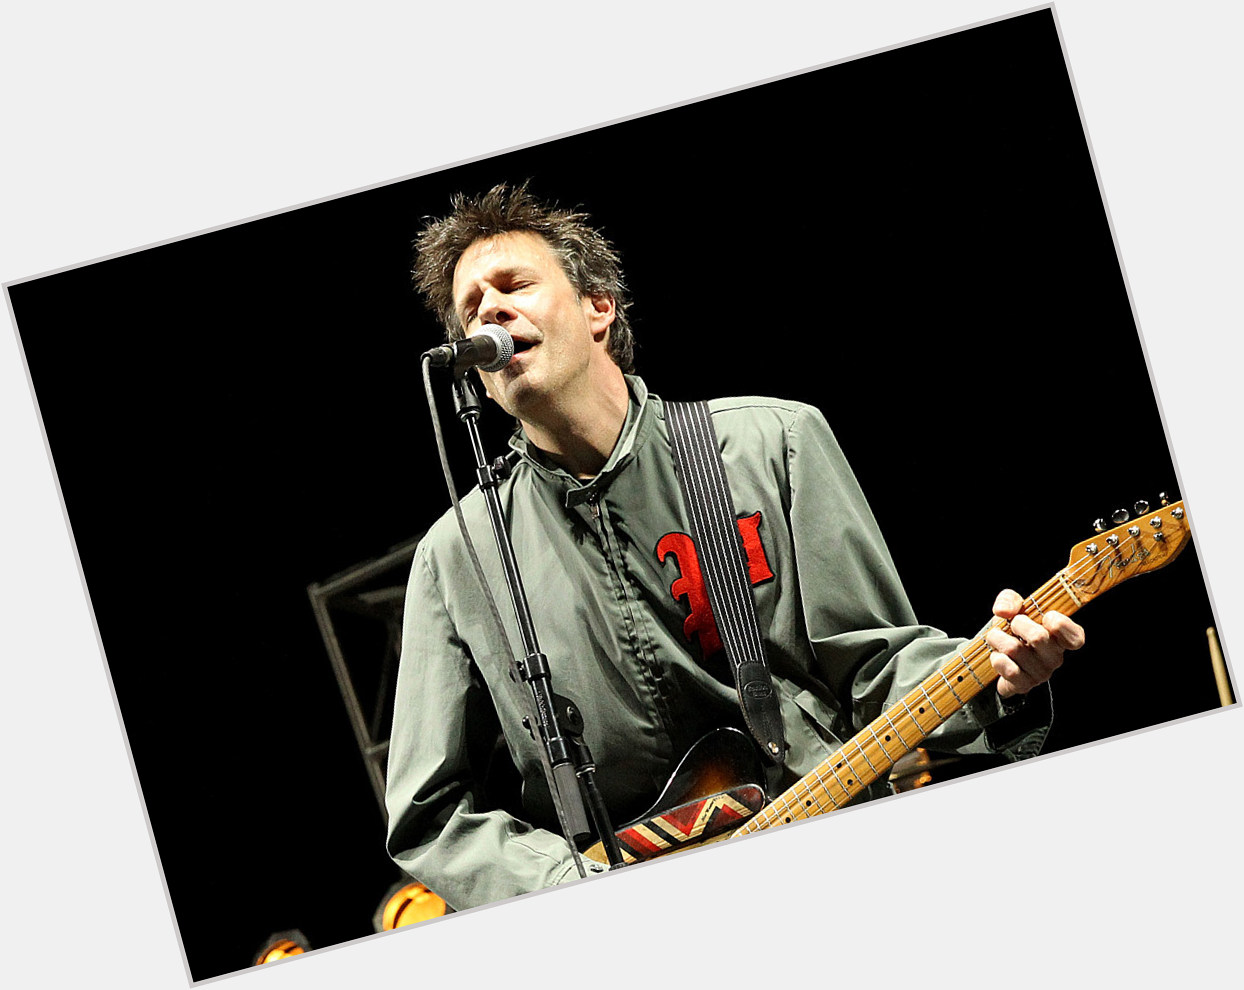 Big happy birthday wishes today to the inimitable Paul Westerberg! 